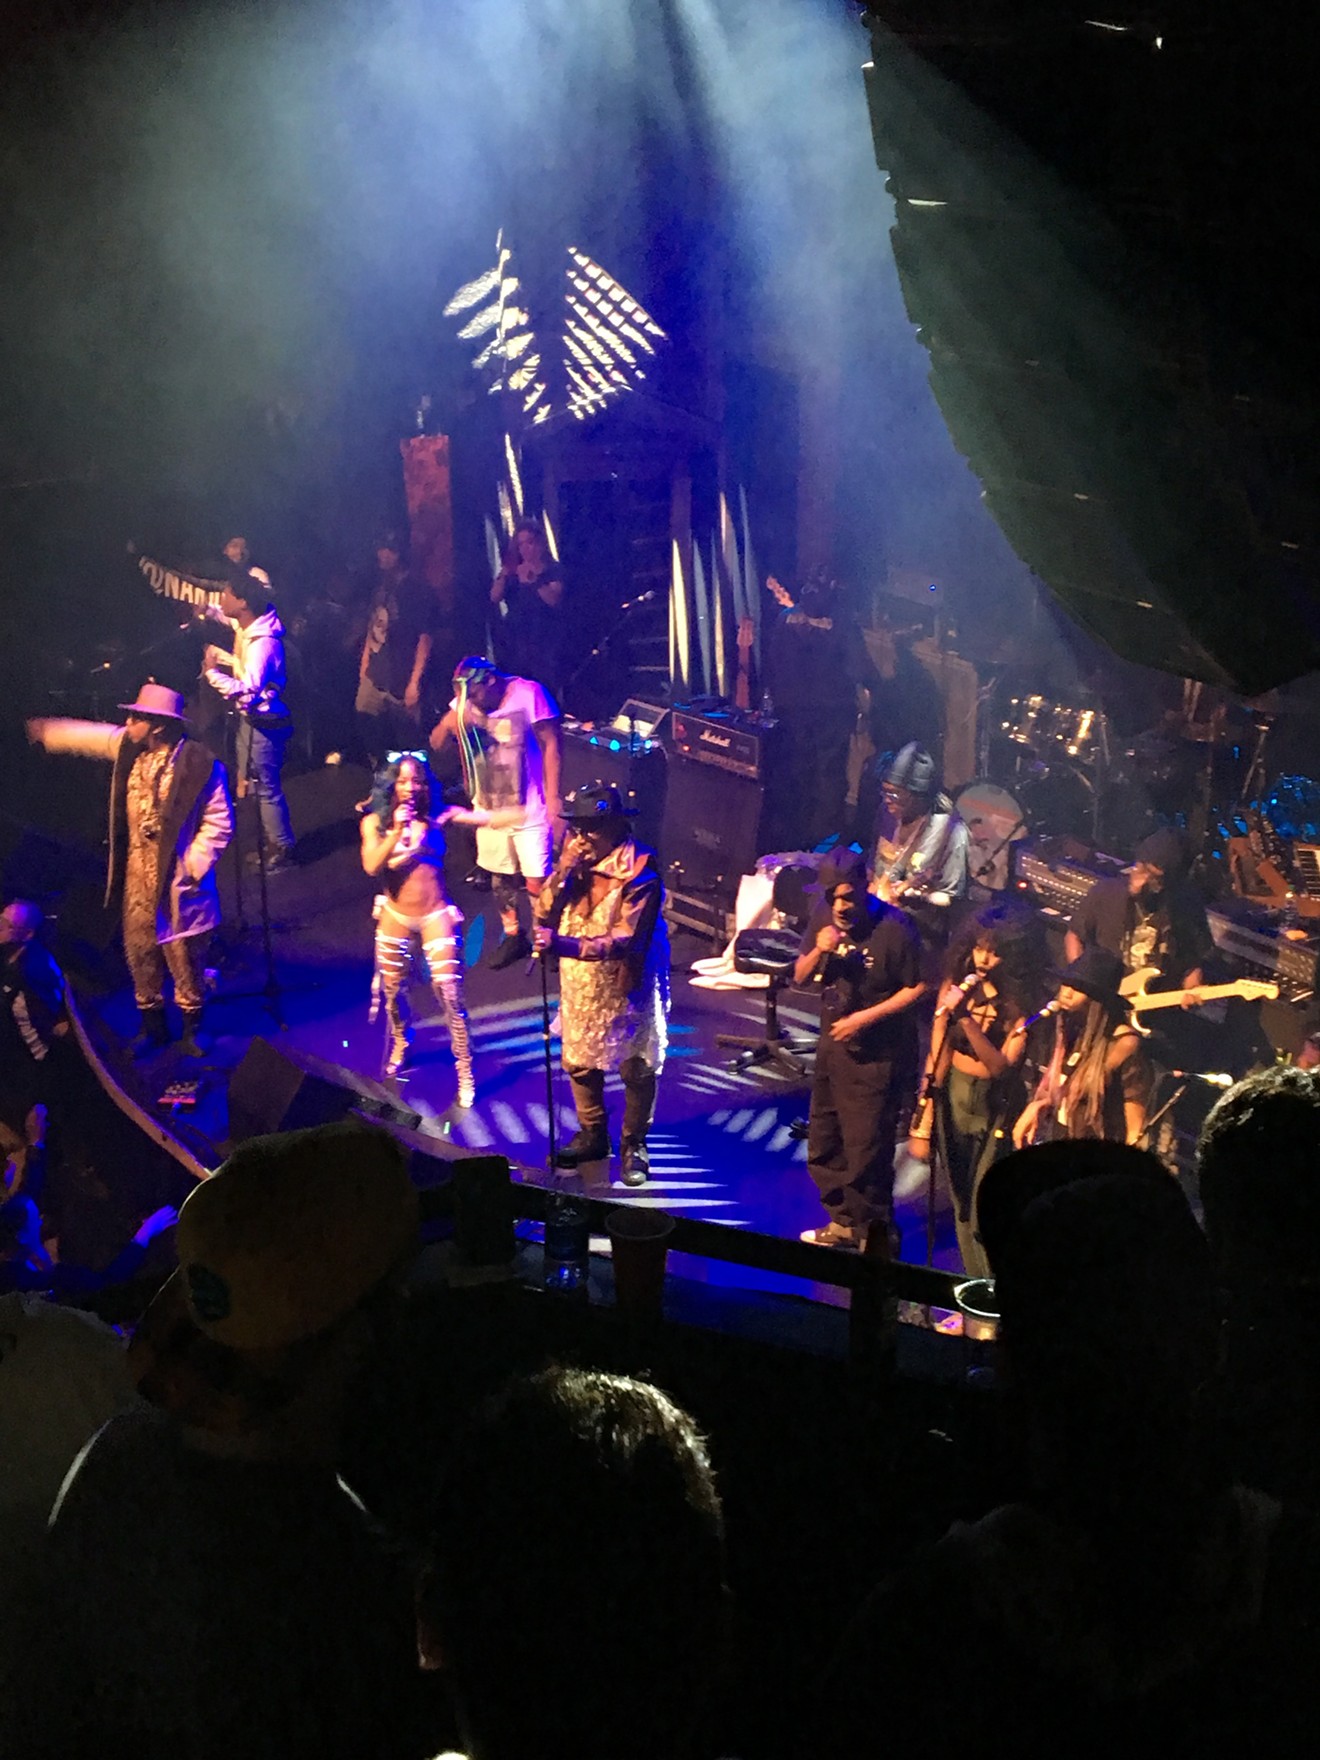 George Clinton, front and center, leading the P-Funk chaos at the Ogden Theatre.